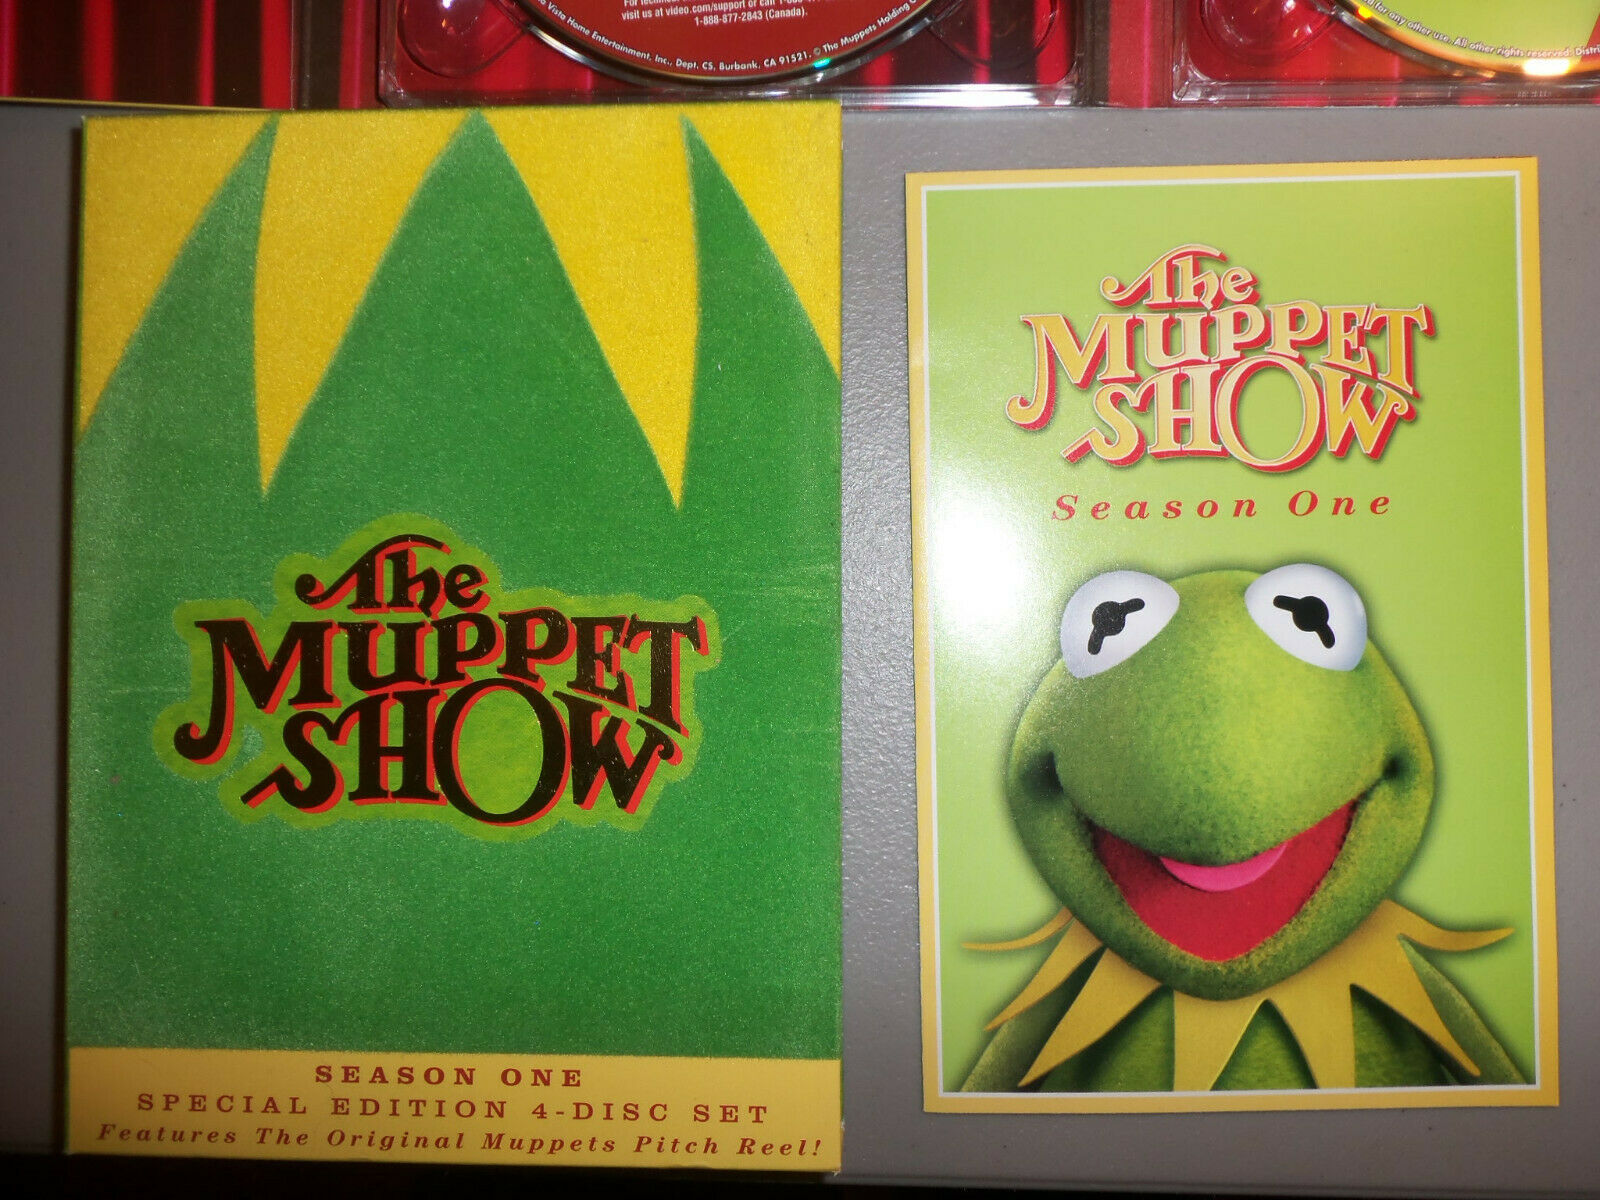 2005 Jim Hensons The Muppet Show Complete First Season Dvd 4 Disc Set